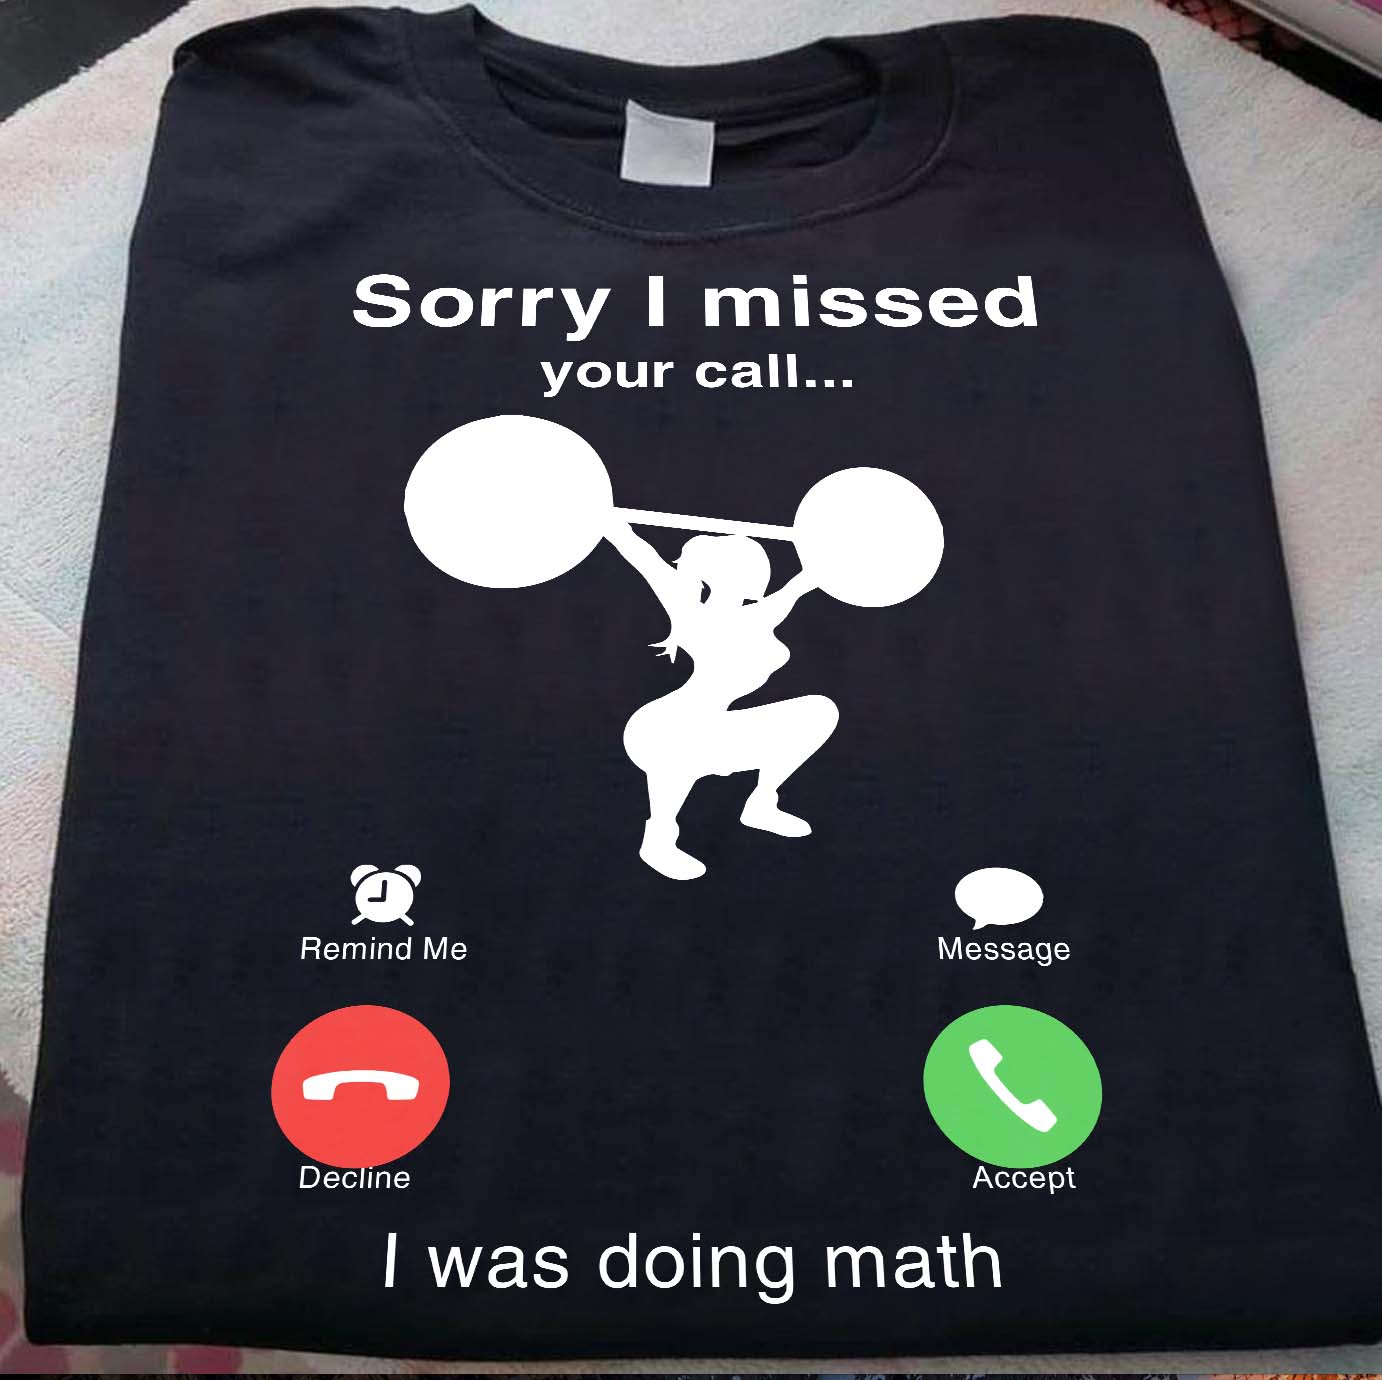 Sorry I missed your call I was doing math - Squat girl